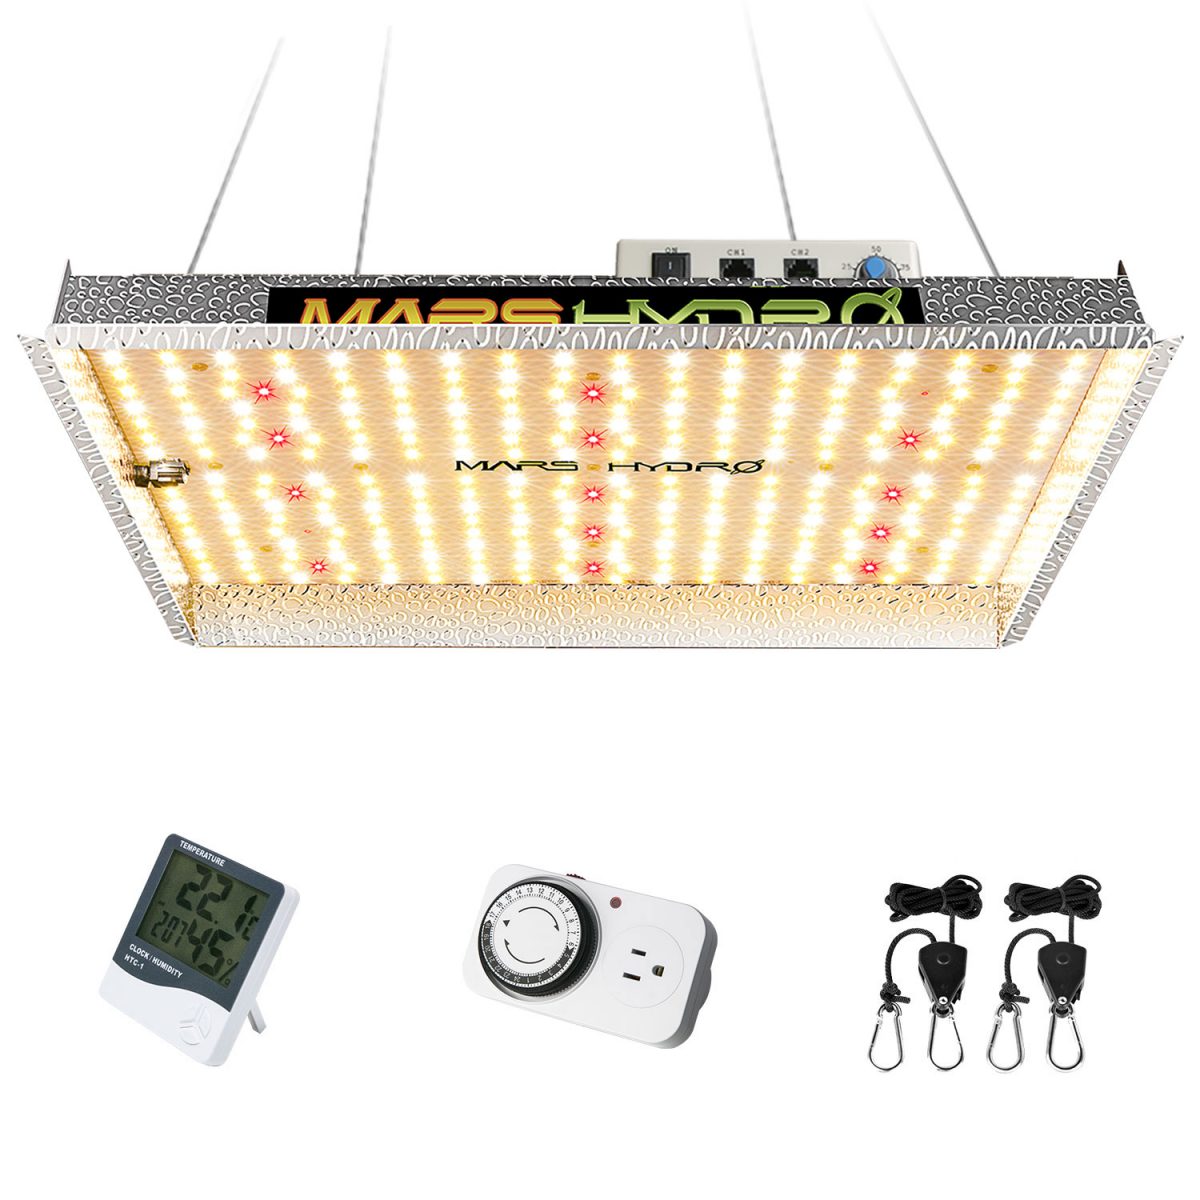 Mars Hydro TS 1000W LED grow Light with timer